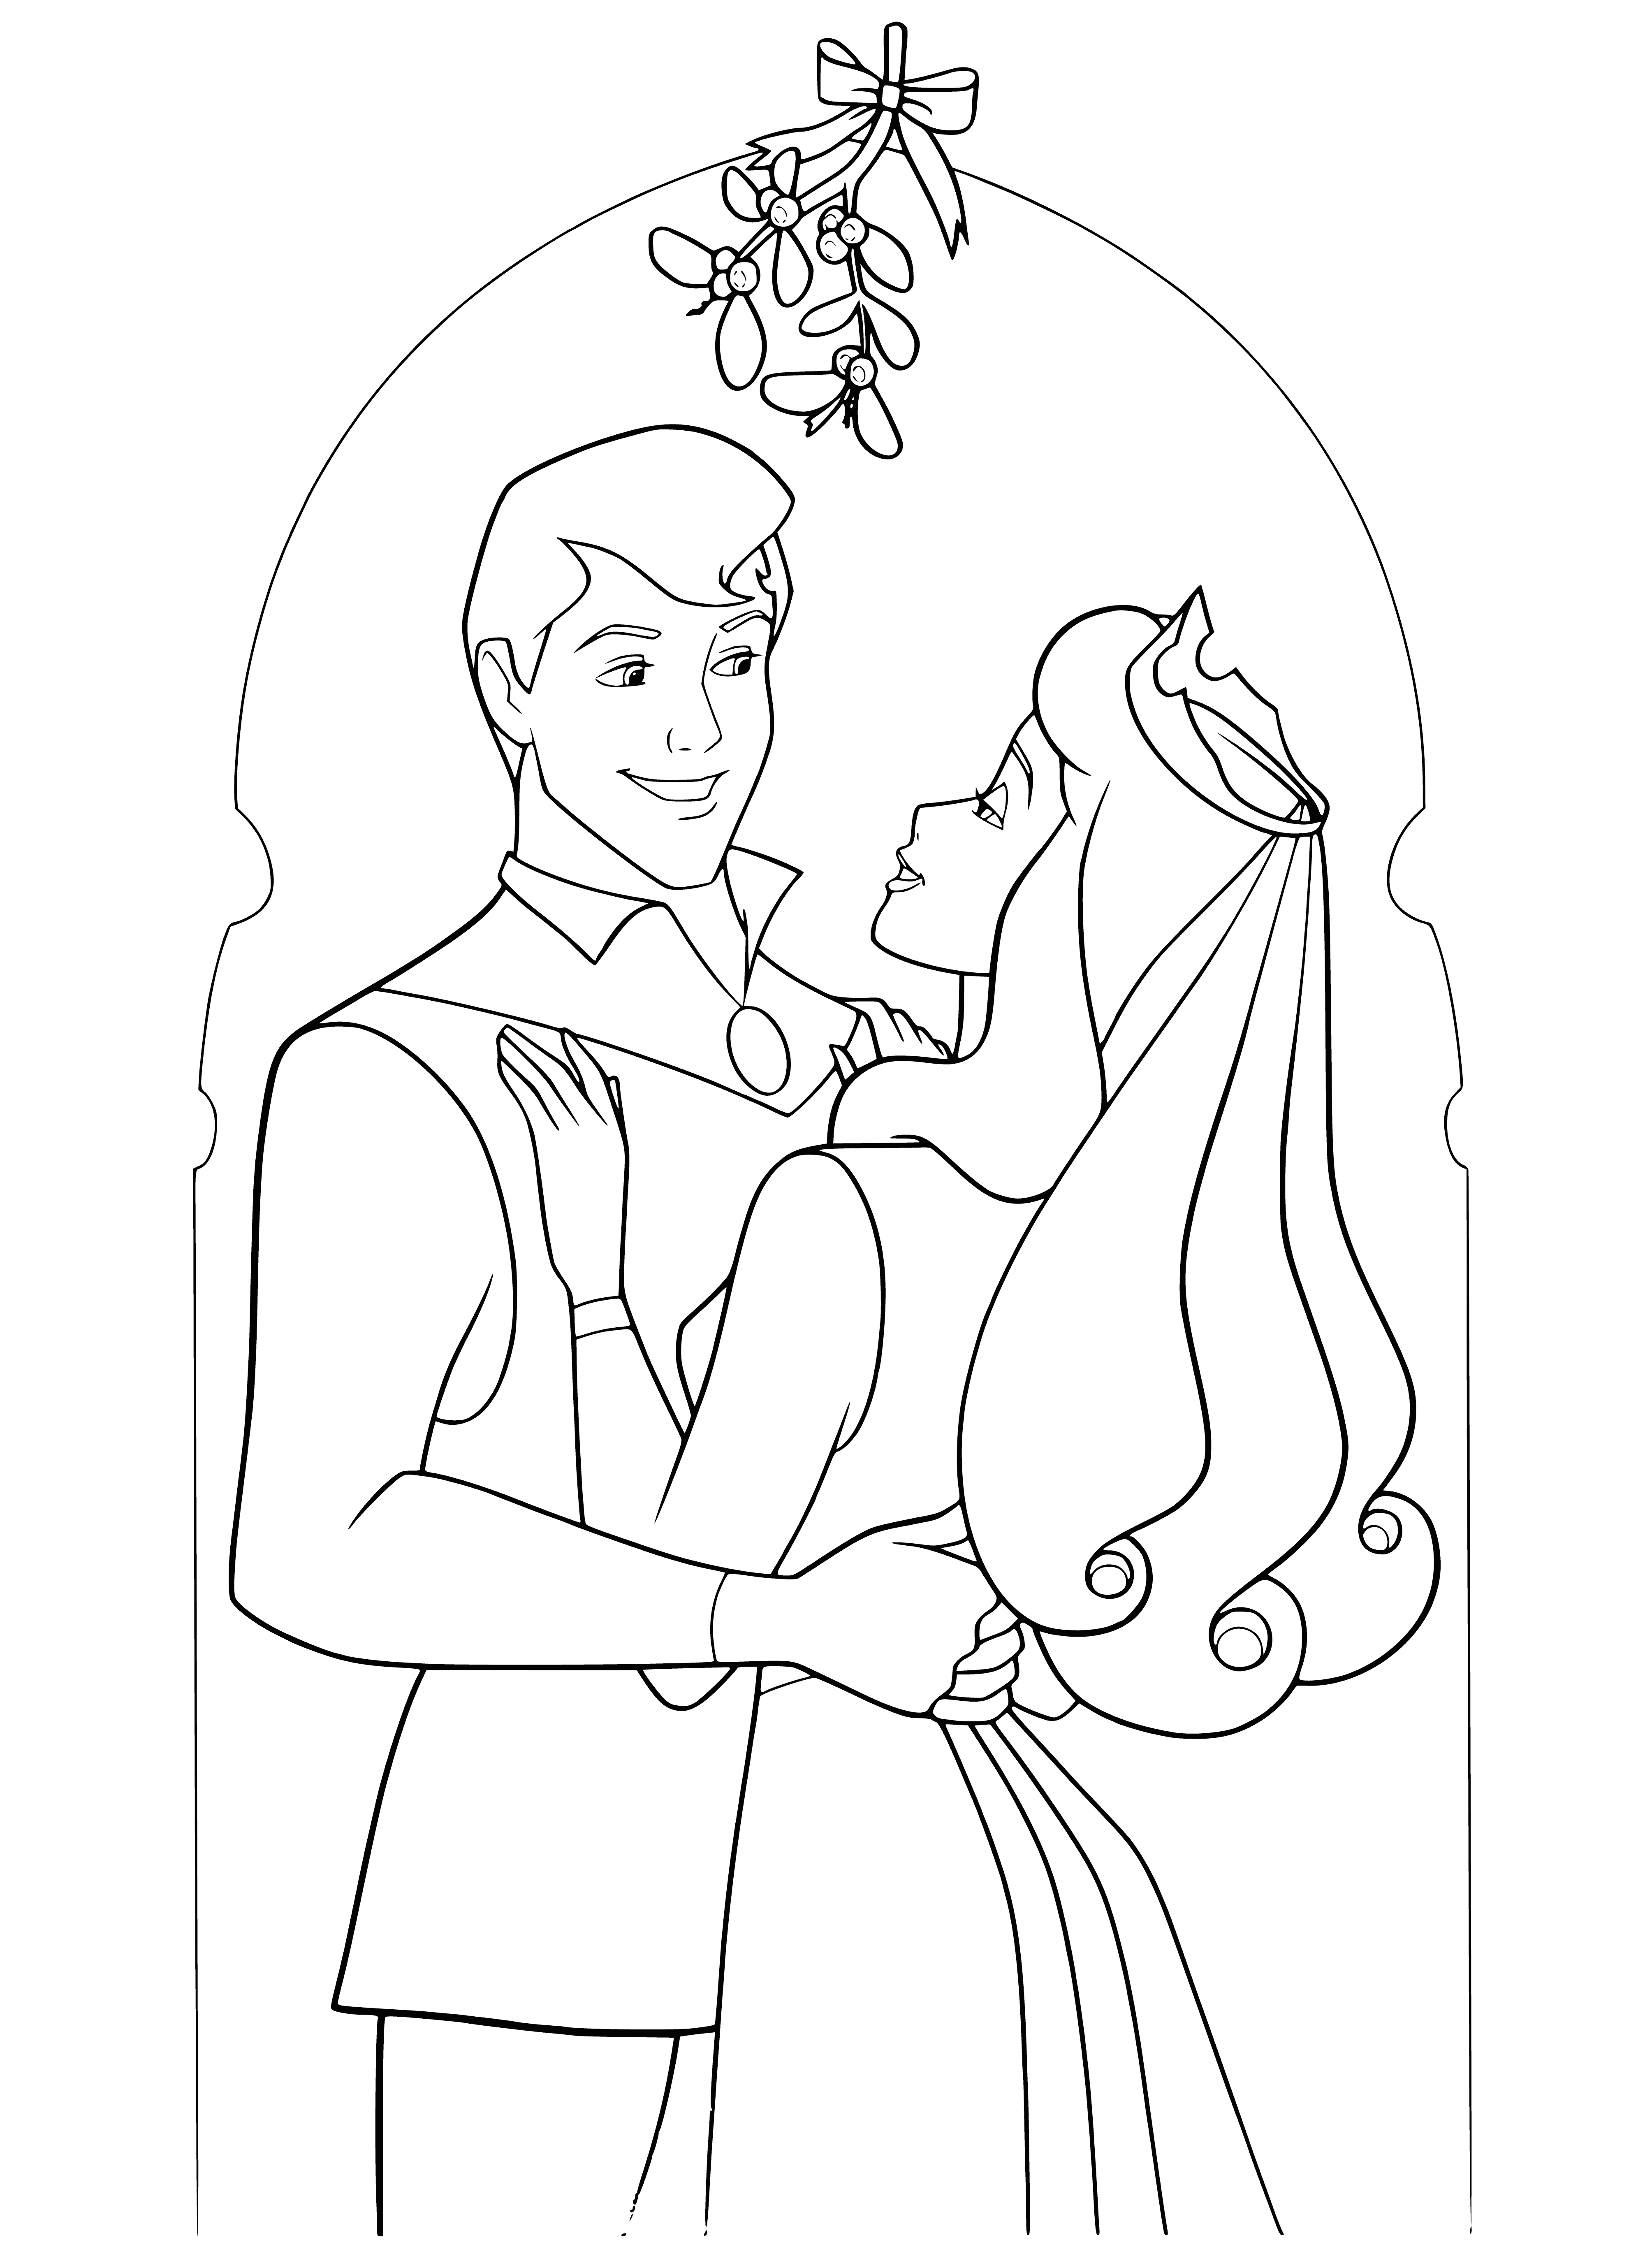 coloring page: Disney Princesses and Prince Aurora toast the New Year together, smiles all around.